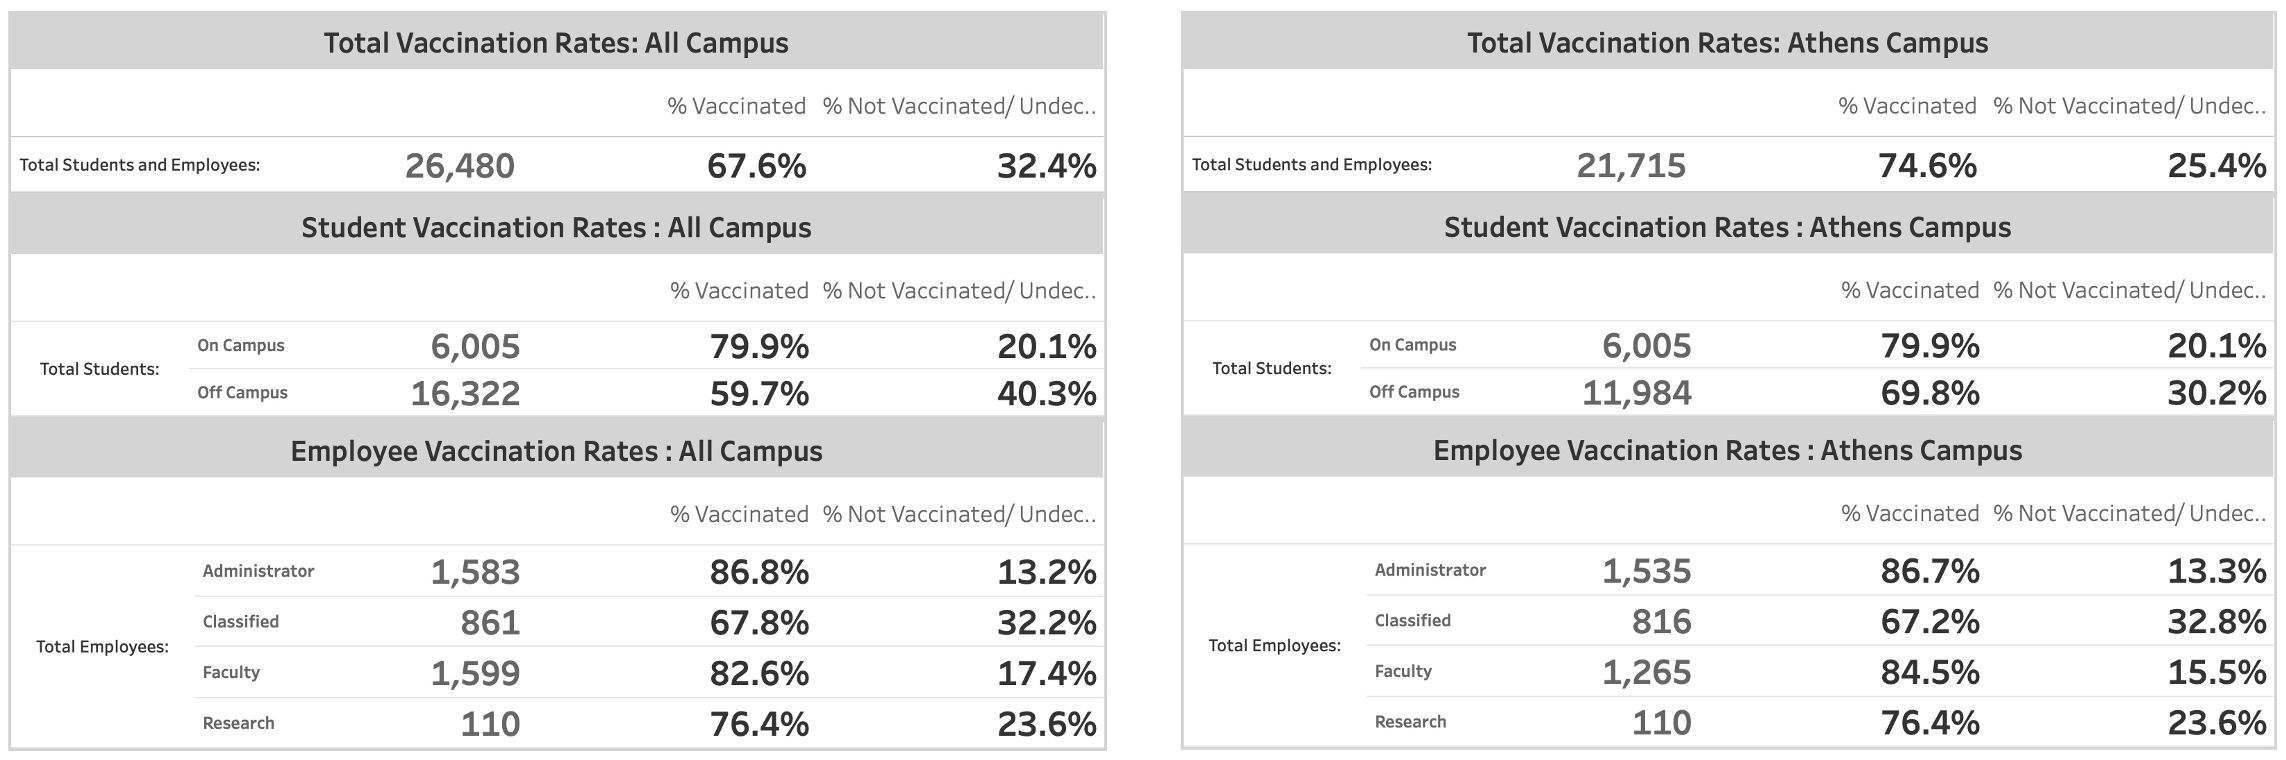 These two charts show vaccination rates for all Ohio University campuses and for the Athens campus alone.